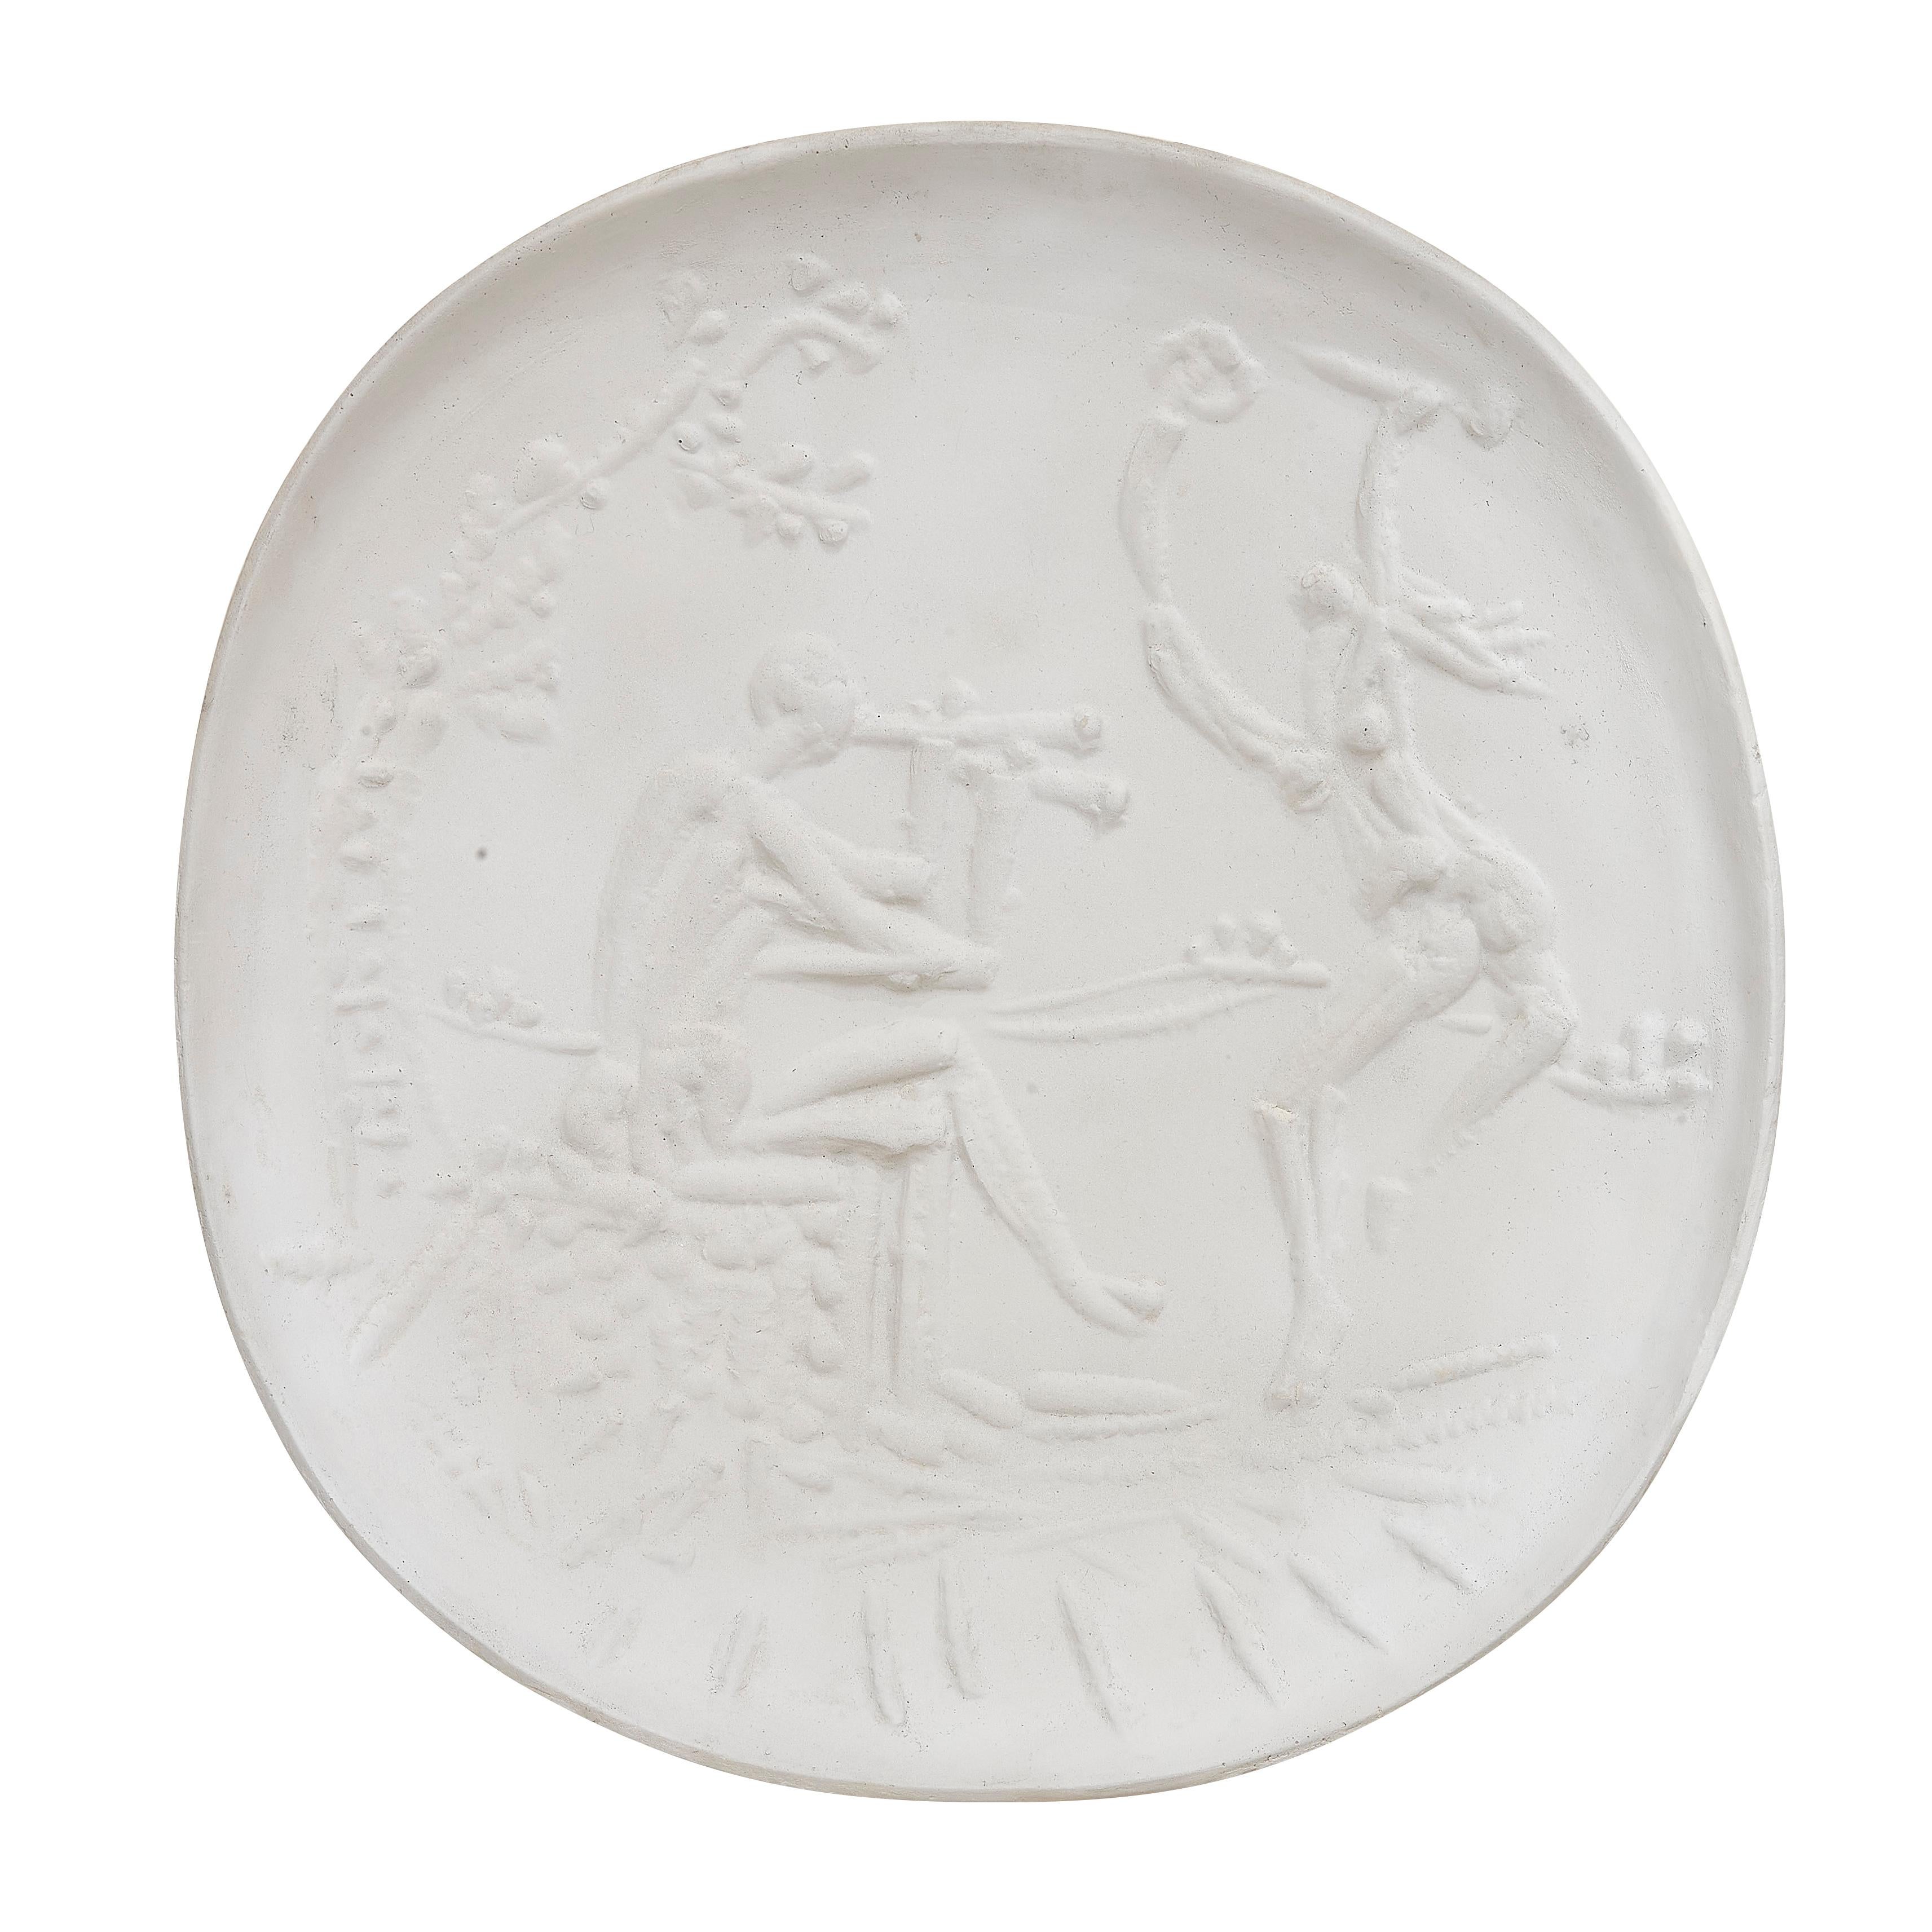 PABLO PICASSO (1881-1973) 
Joueur de diaule et faune (A. R. 342) 

Terre de faïence plate, 1956, with the workshop numbering, aside from the edition of 100, with the Empreinte Originale de Picasso and Madoura stamps.